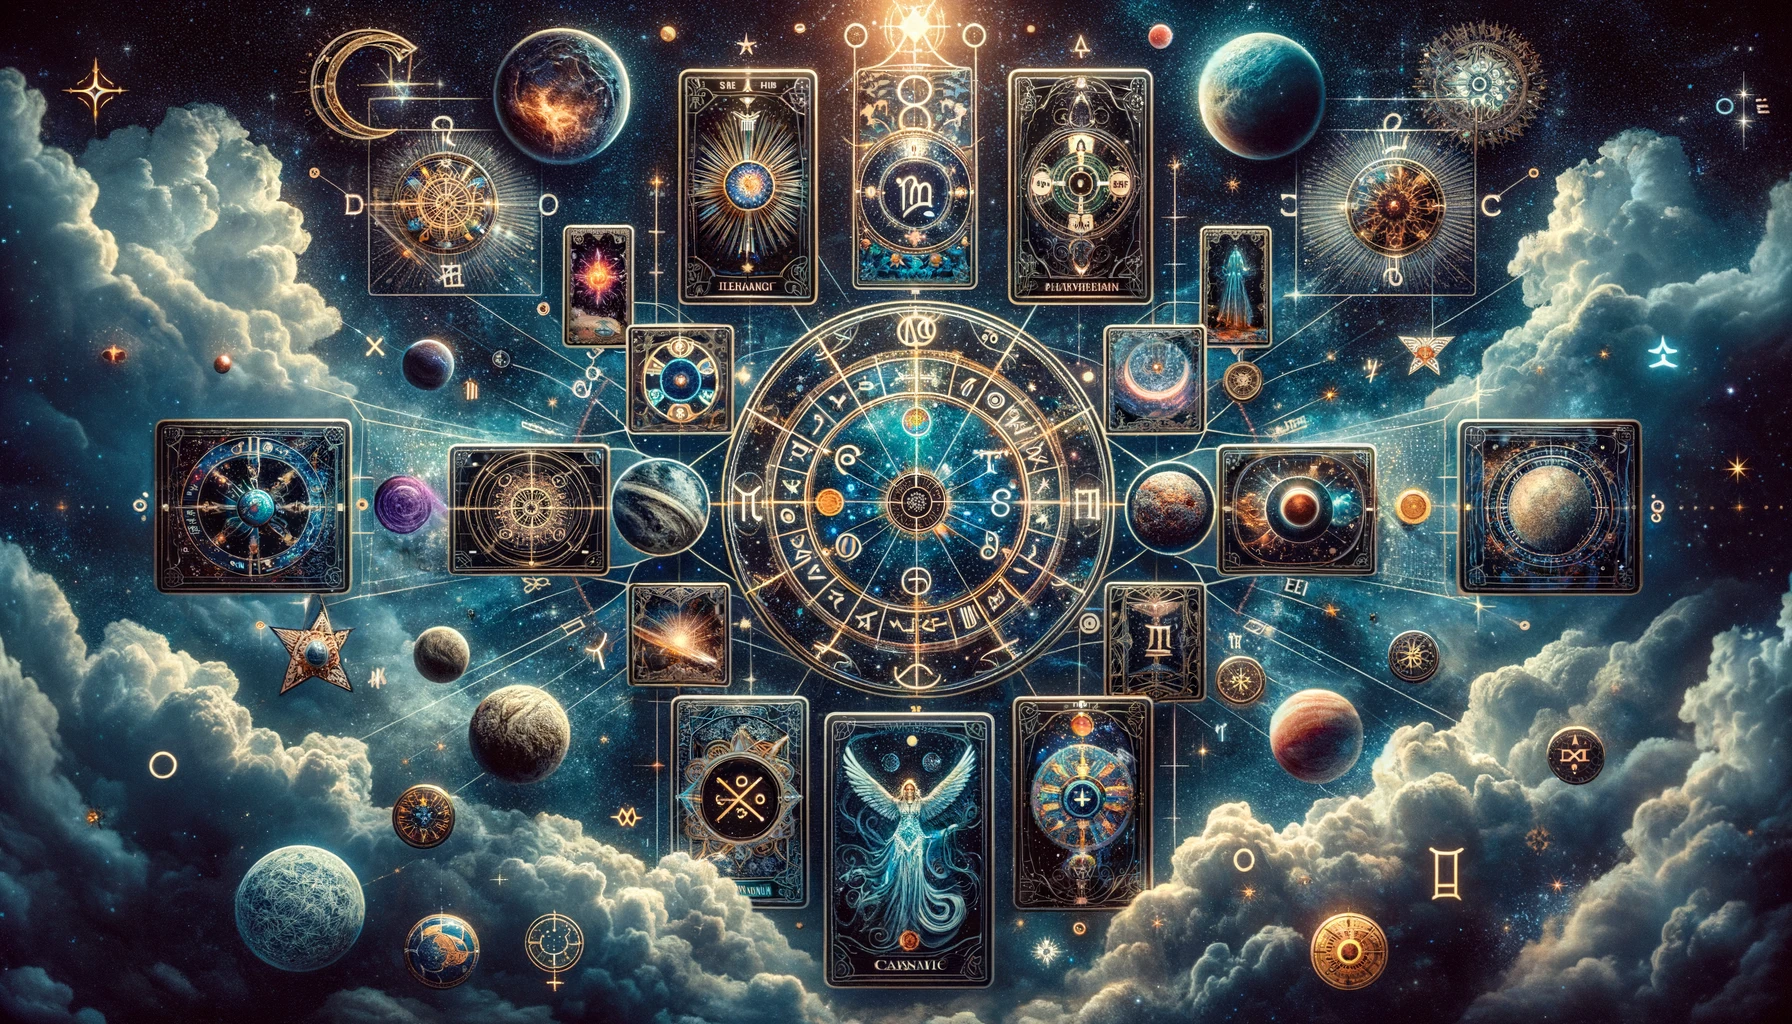 An intricate image of a celestial themed tarot spread with zodiac symbols planetary icons and a starry backdrop. The tarot spread is elaborately lai